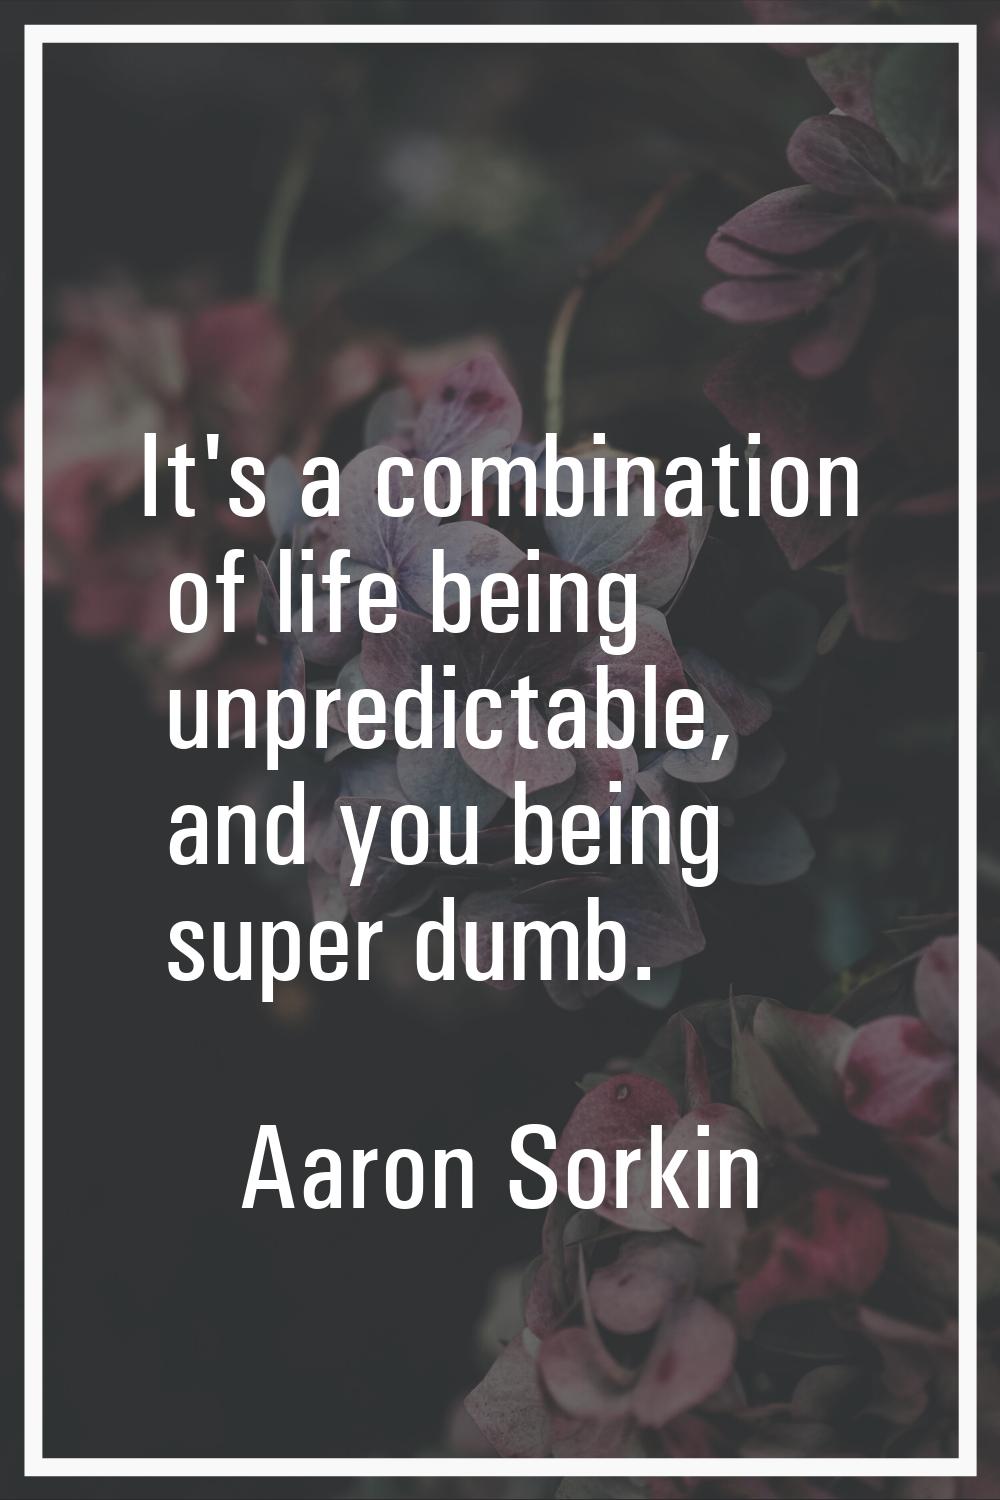 It's a combination of life being unpredictable, and you being super dumb.